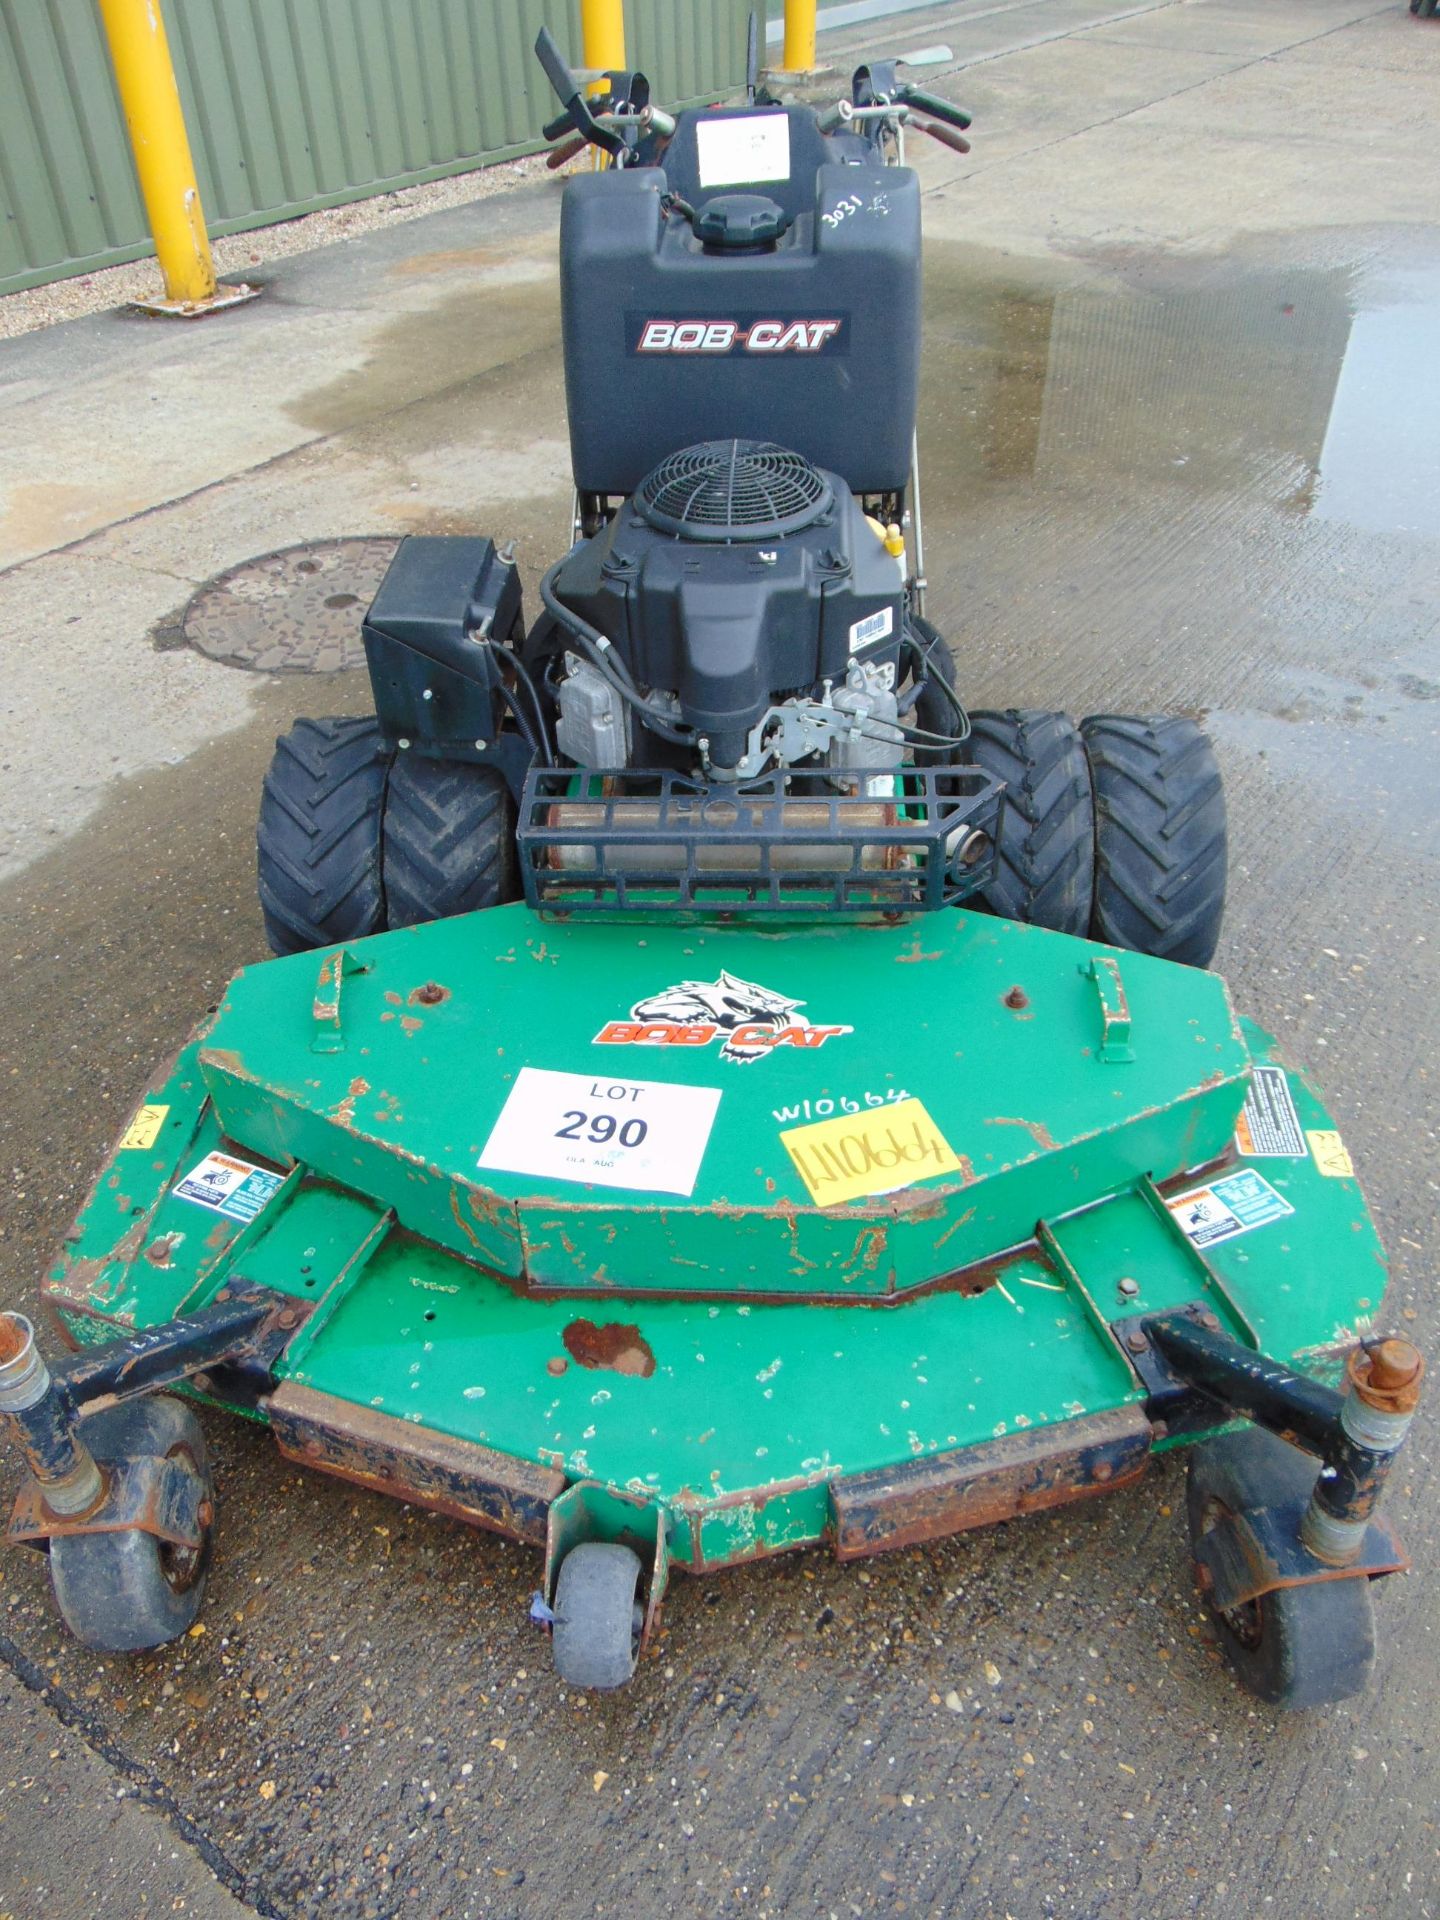 2015 Ransomes BOBCAT 52" Zero Turn Lawn Mower - only 1290 hours!! - Image 3 of 10